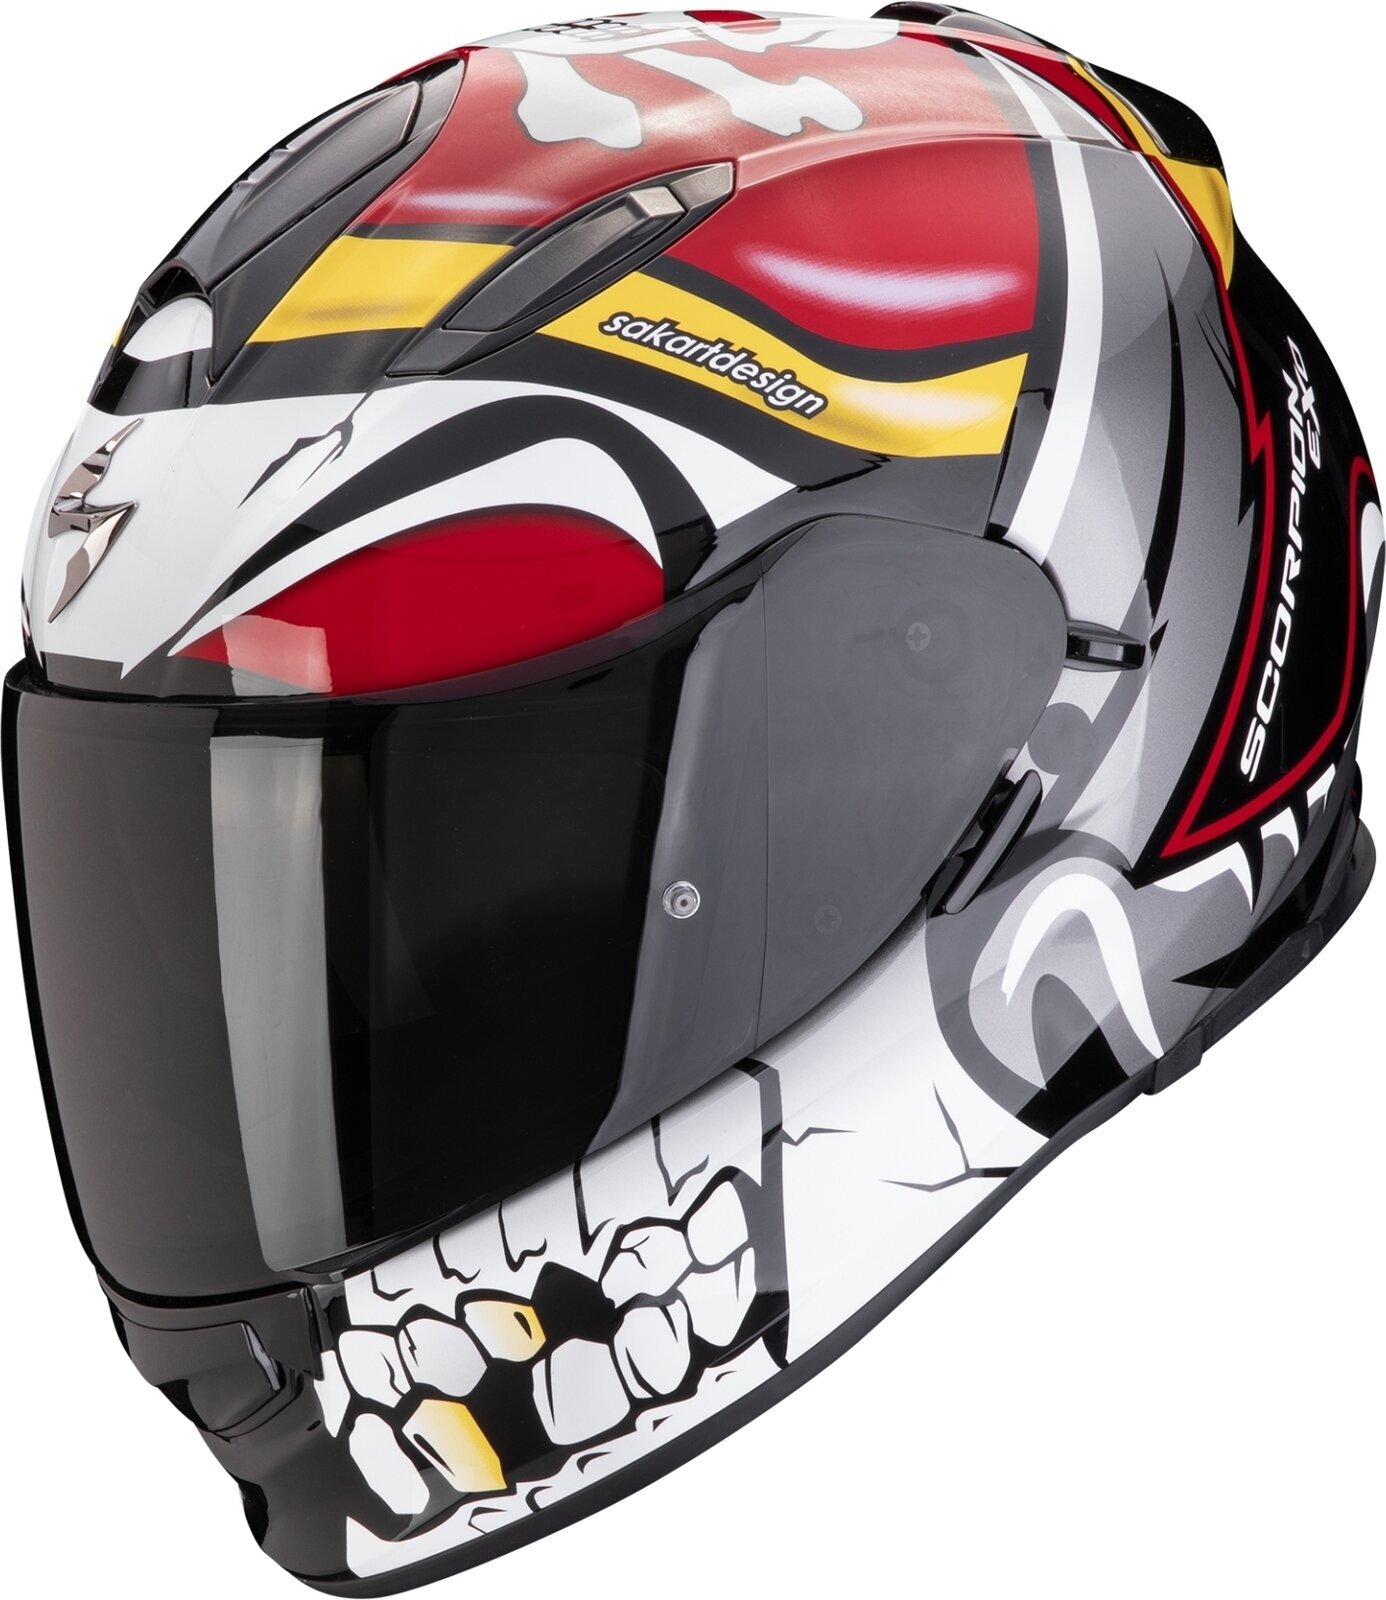 Kask Scorpion EXO 491 PIRATE Red M Kask